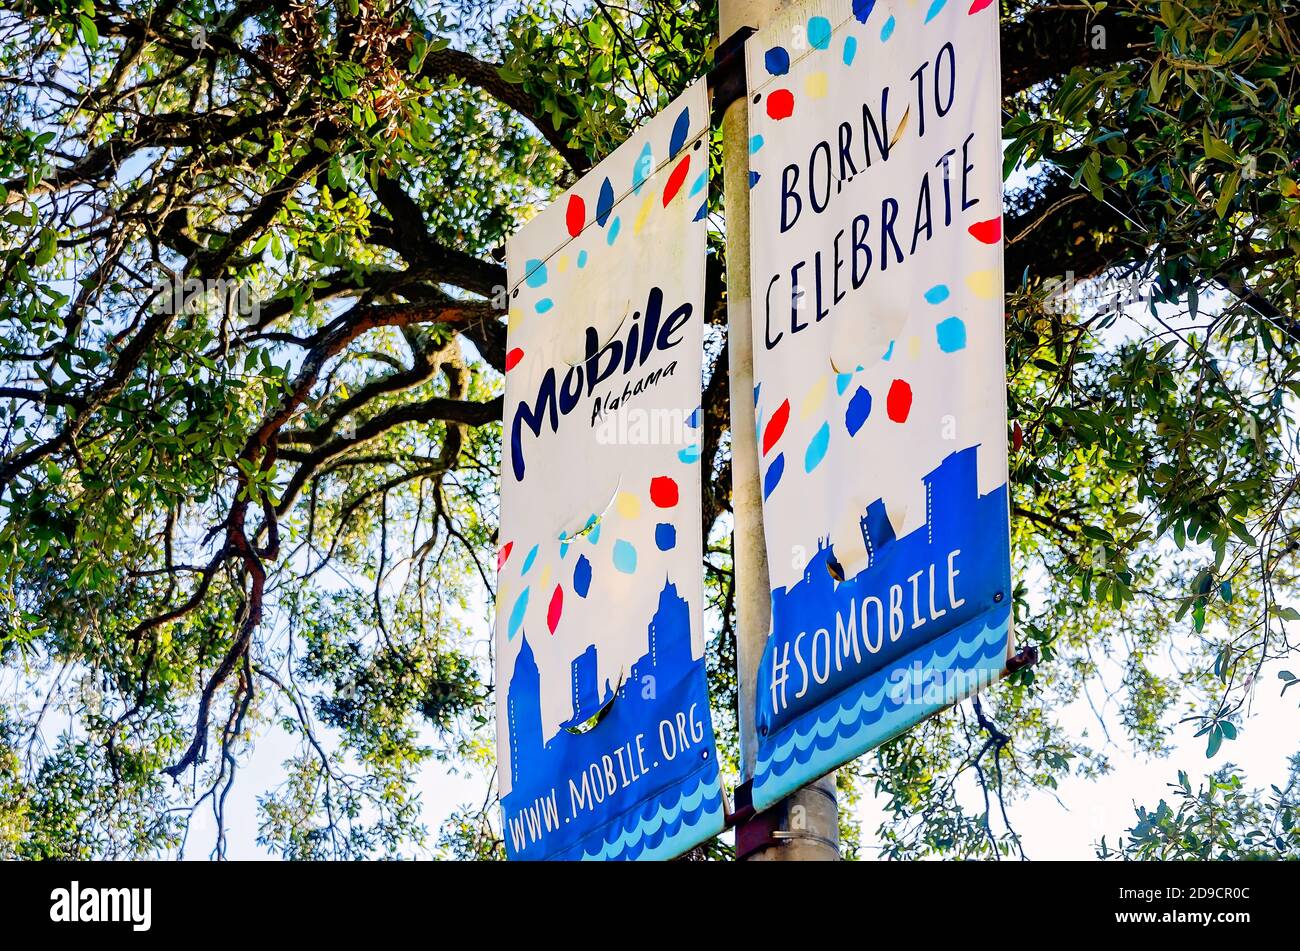 Tourism banners hang on a lamp post on Government Street, Oct. 31, 2020, in Mobile, Alabama. Stock Photo